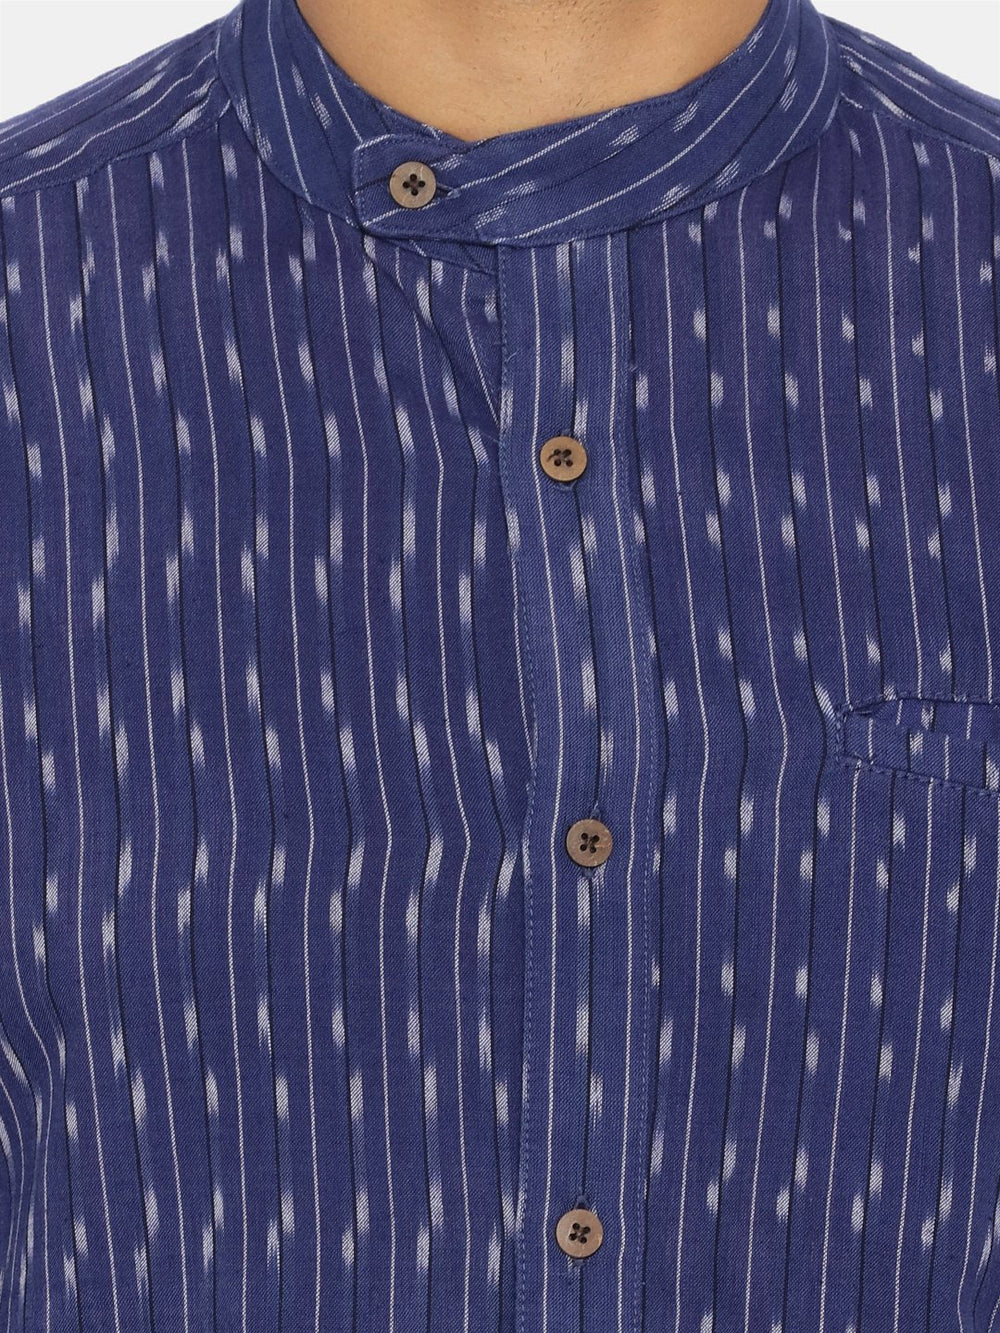 Navy blue extended collared shirt